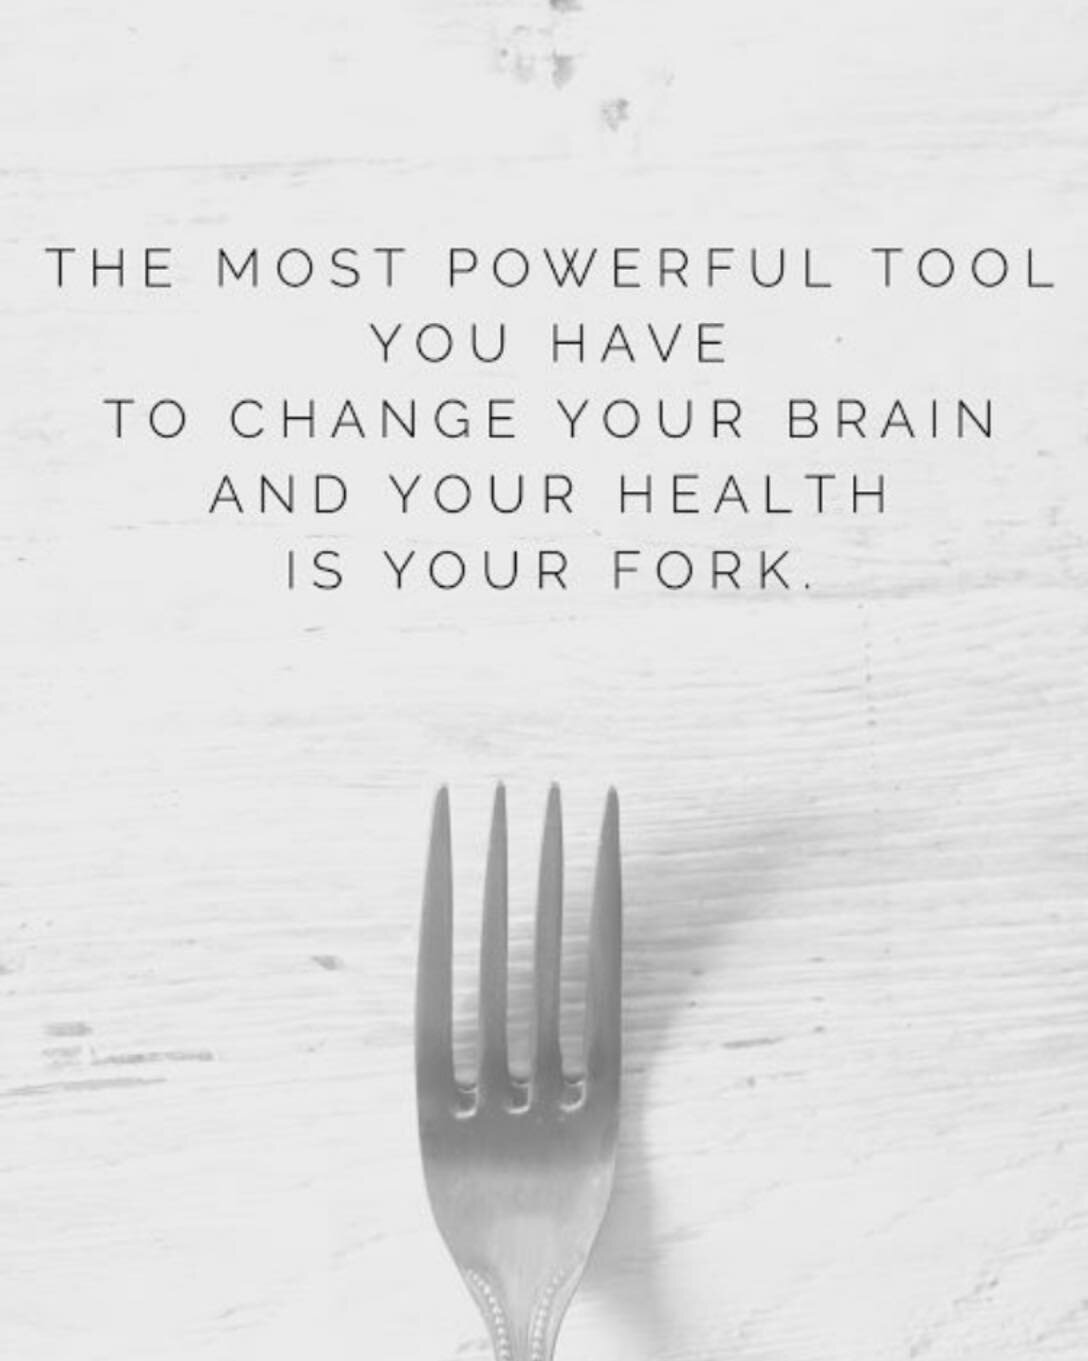 🥦🍎 Nourish your body with whole, nutrient-rich foods to fuel your health and well-being from the inside out. 

Your food choices are powerful medicine! 💪🏼 

#FoodIsMedicine #NutritionMatters #FunctionalMedicine #EatWellFeelWell #HealthyEating #We